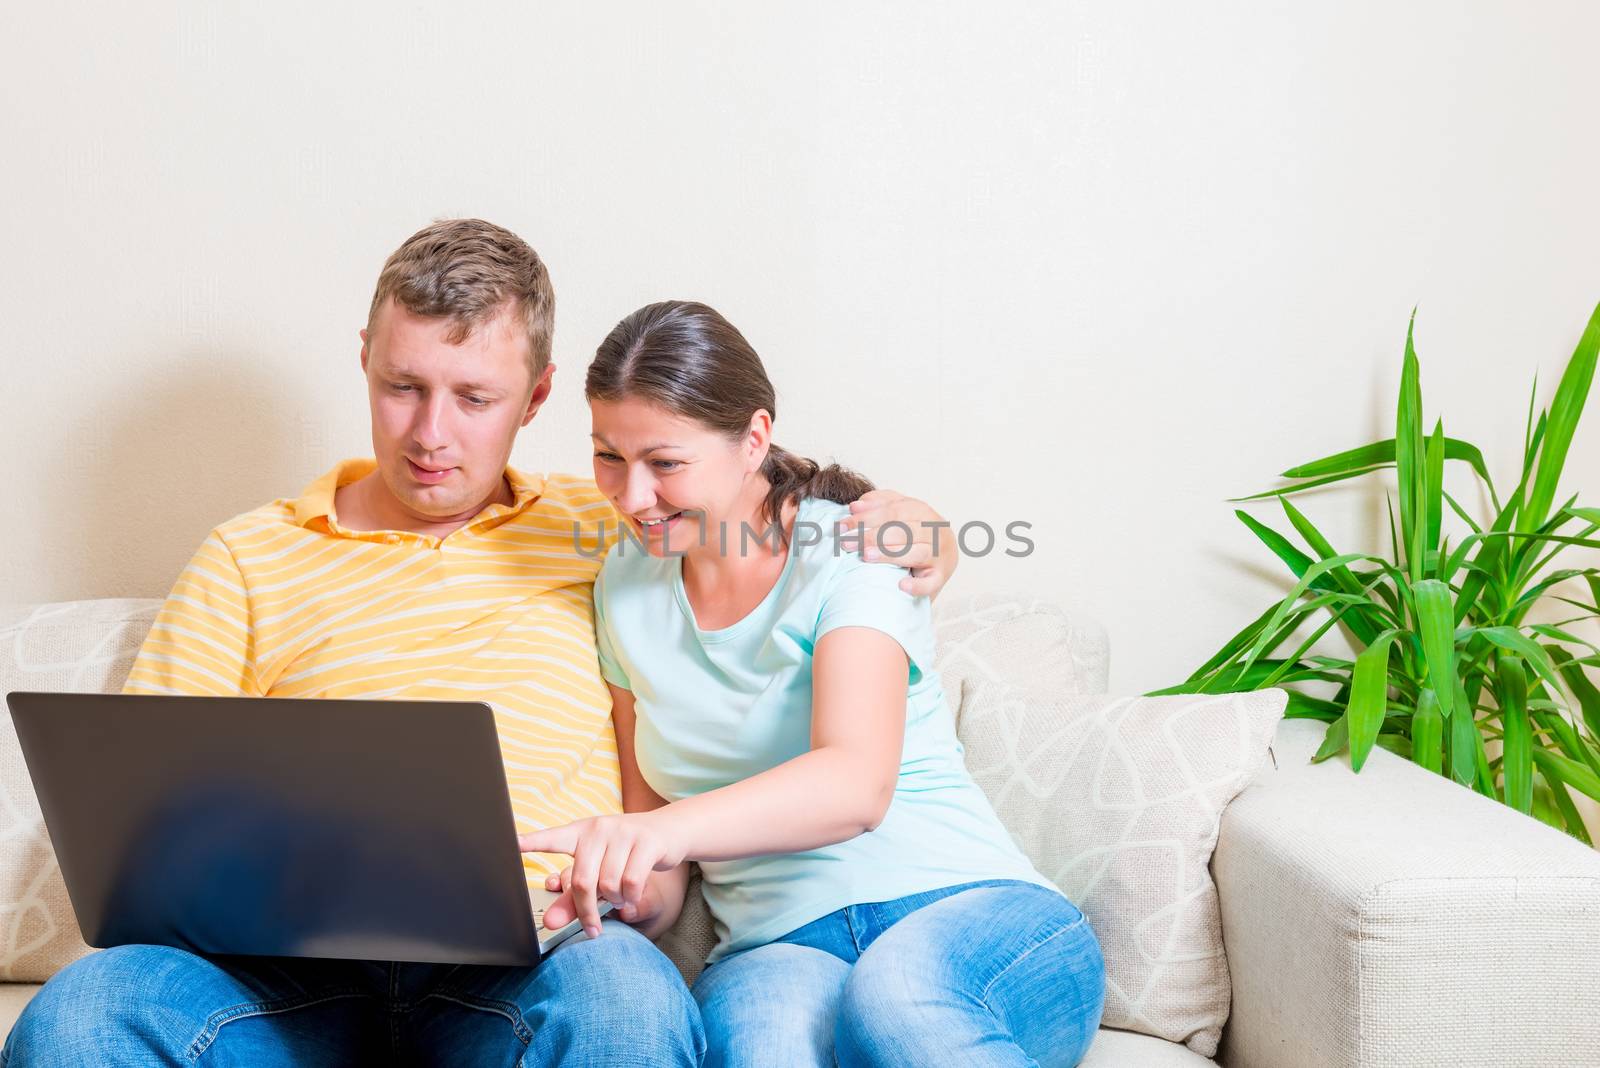 couple shopping online on a couch in the living room by kosmsos111